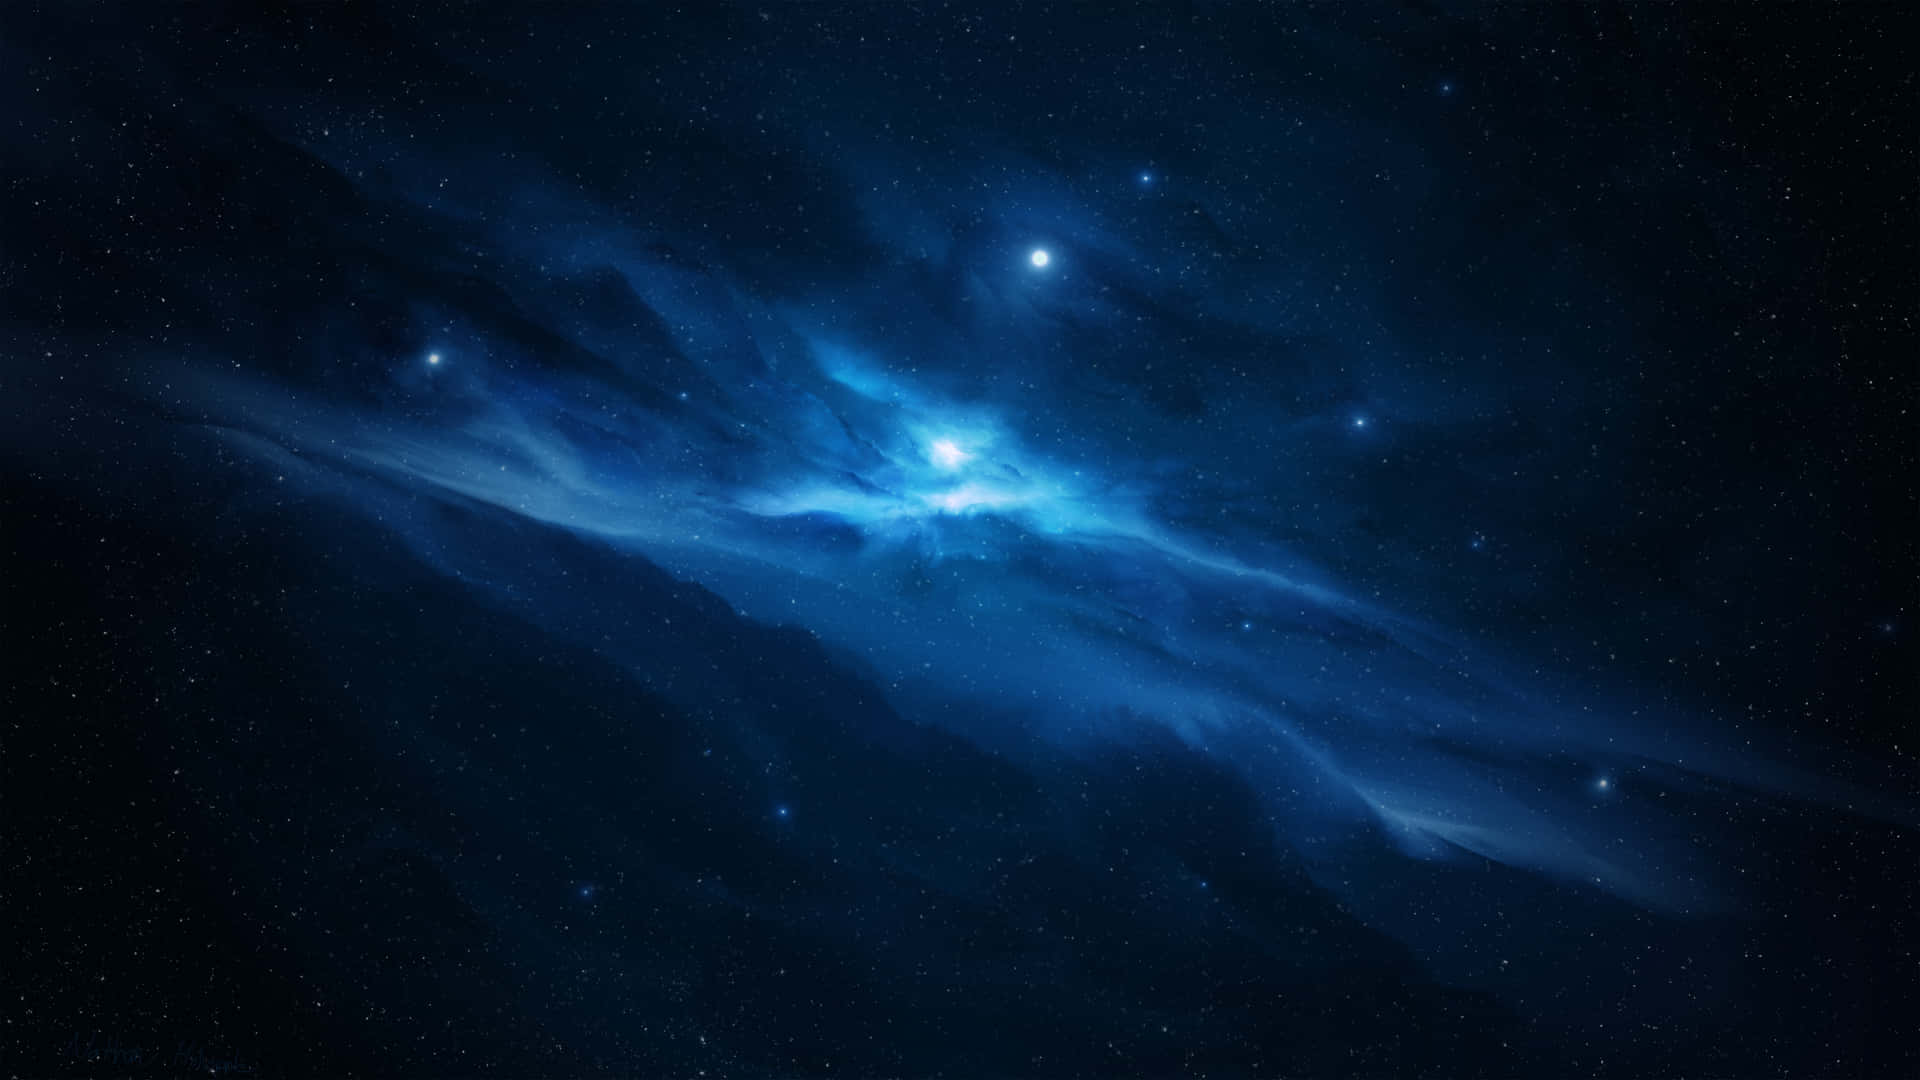 Explore the beauty of outer space in 4K resolution